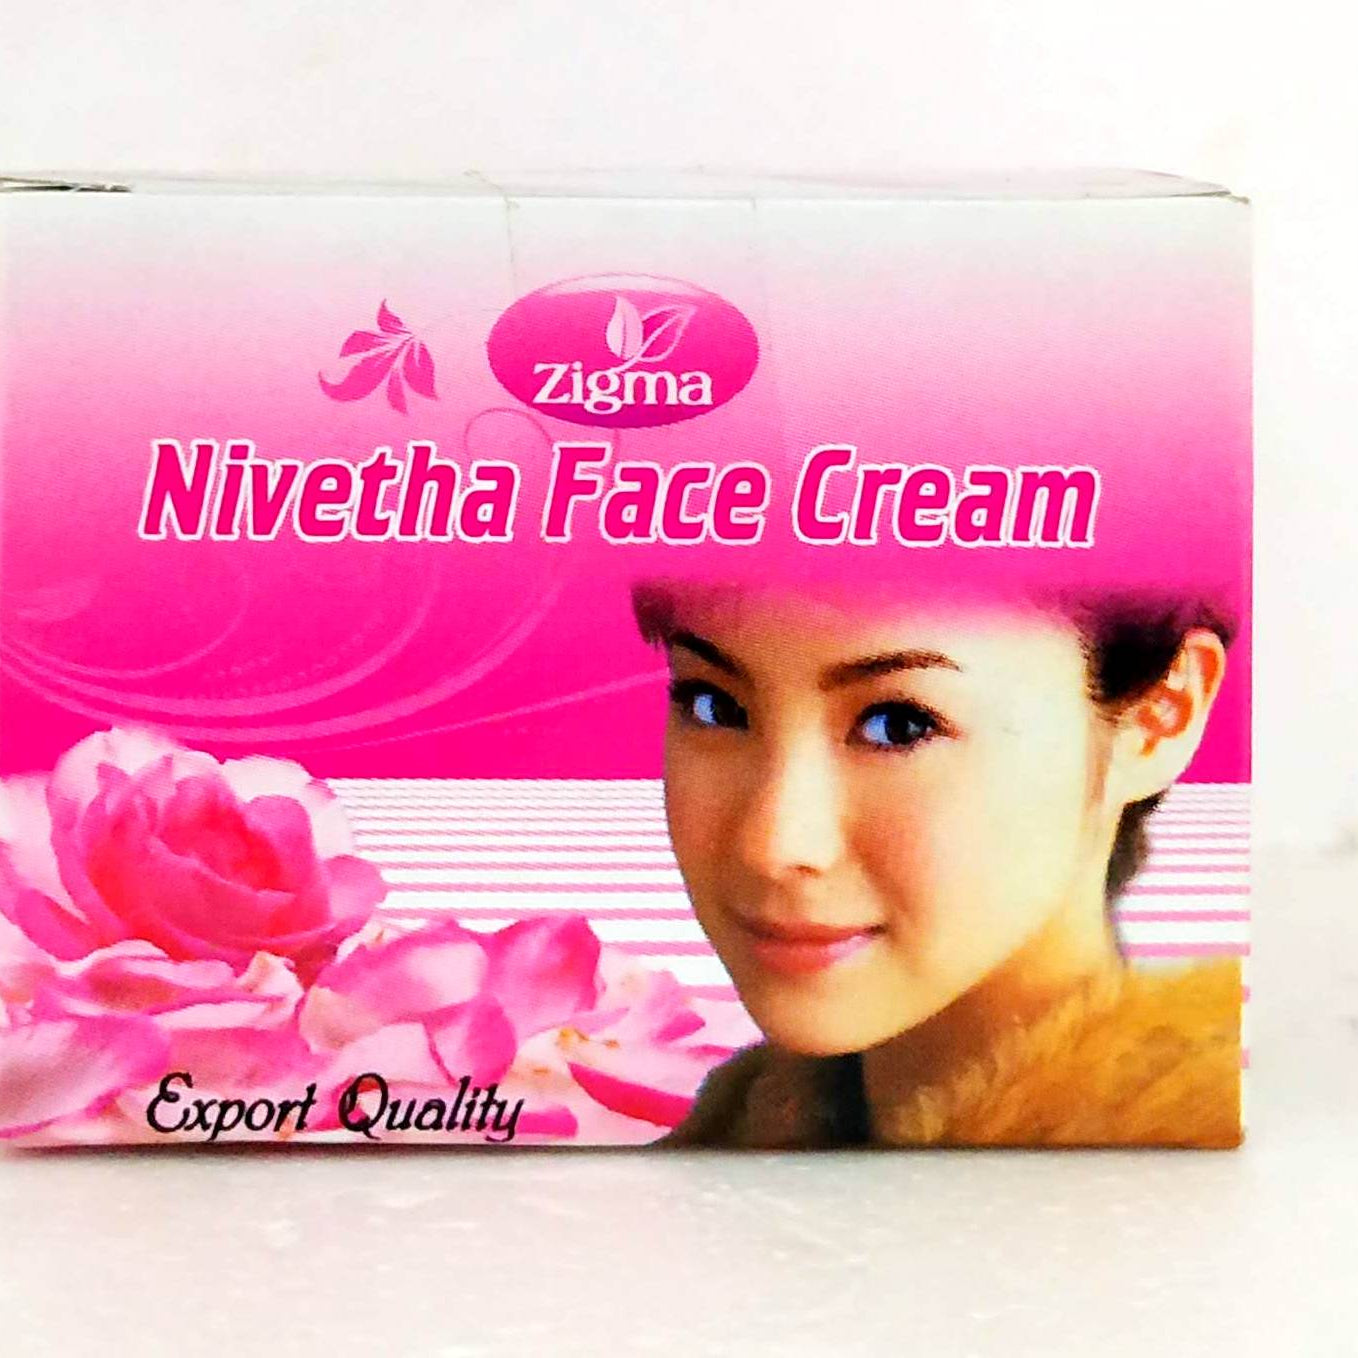 Shop Nivetha Face Cream 20gm at price 120.00 from Zigma Online - Ayush Care